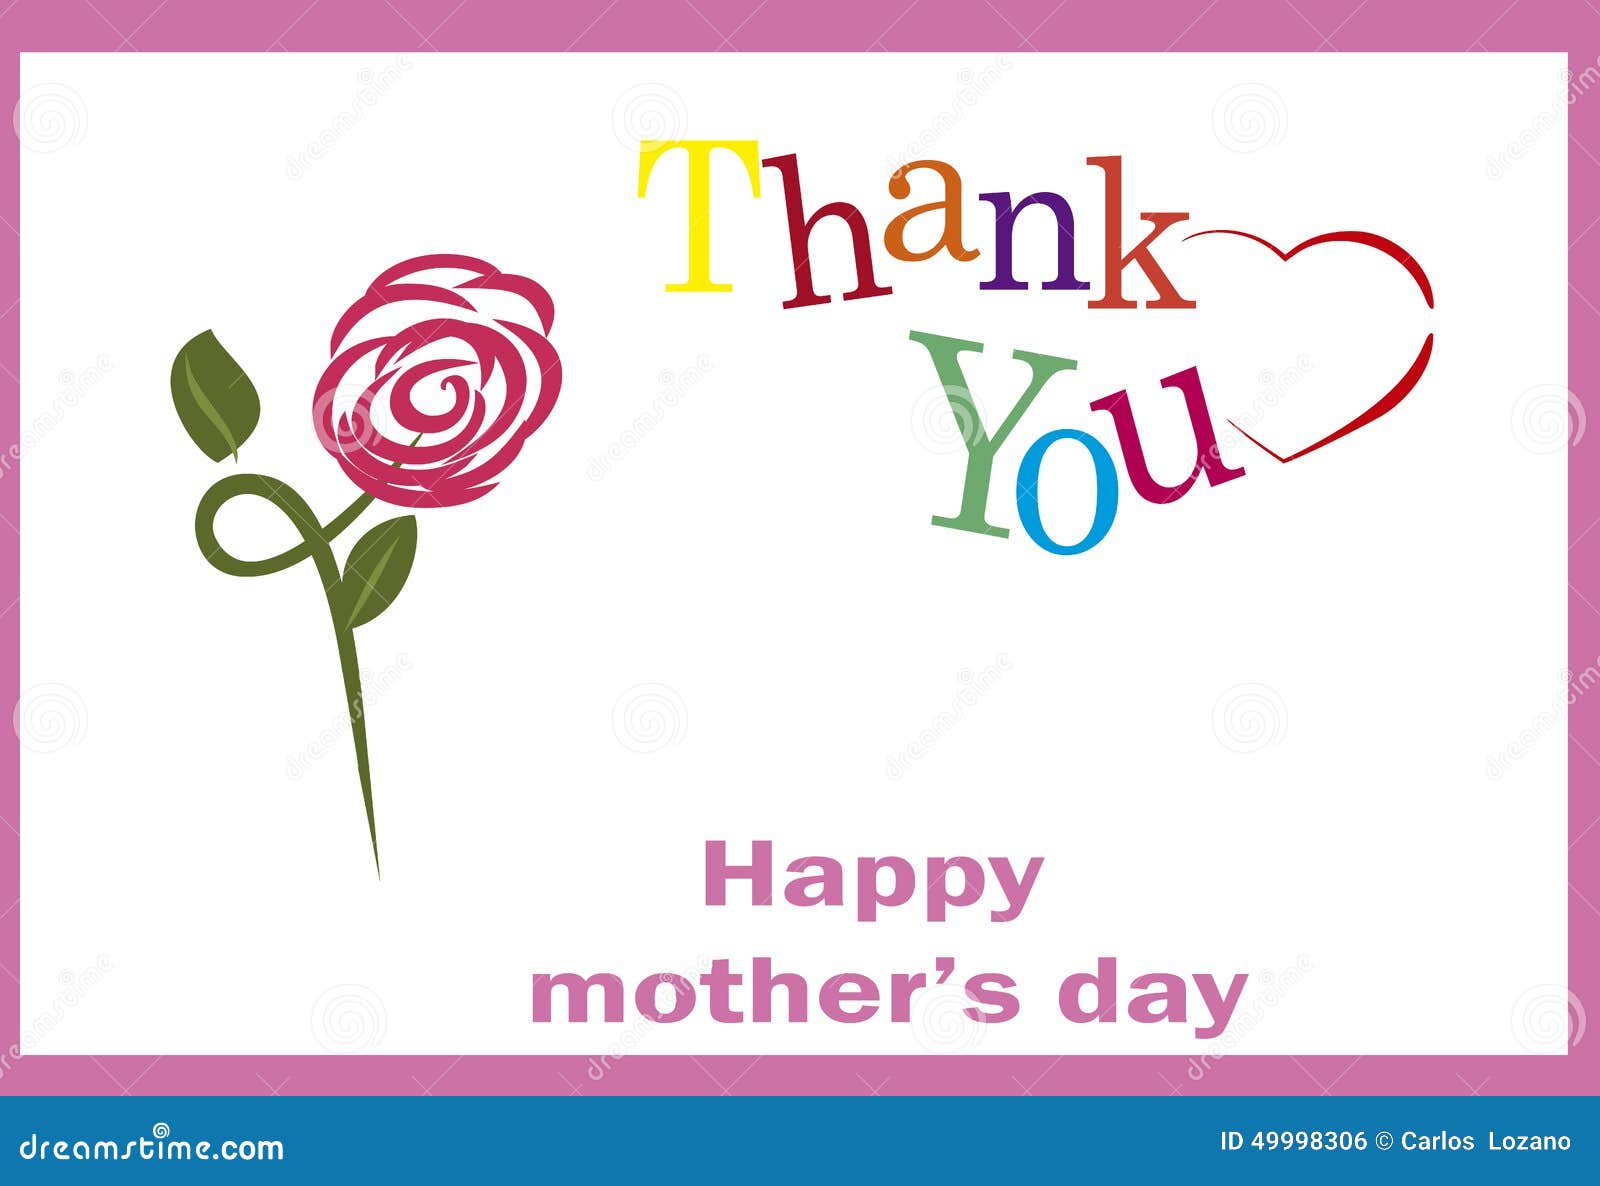 thank you mom, happy mothers day